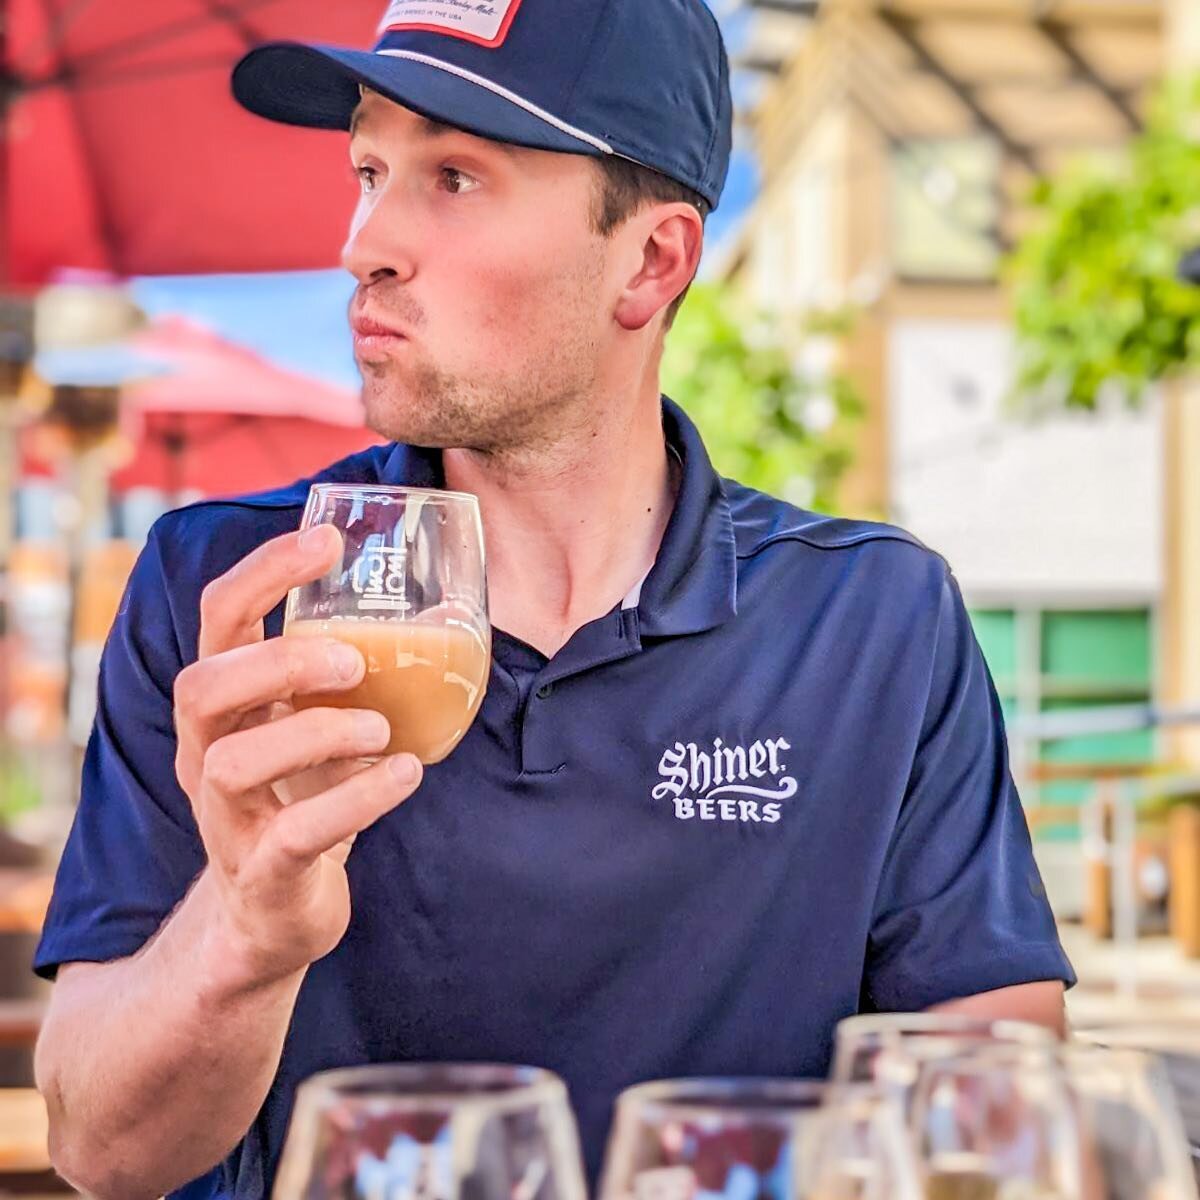 The look on your face when you taste Delta Roots 😃. Come and try for yourself at the tasting room this weekend! 🍻. 
.
Open Fri - Sun 11am - 5pm
.
.
.
.
.
#sacramento #mysacramento #sacramentolife #discoversacramento #exploresac #916 #sactown #herei